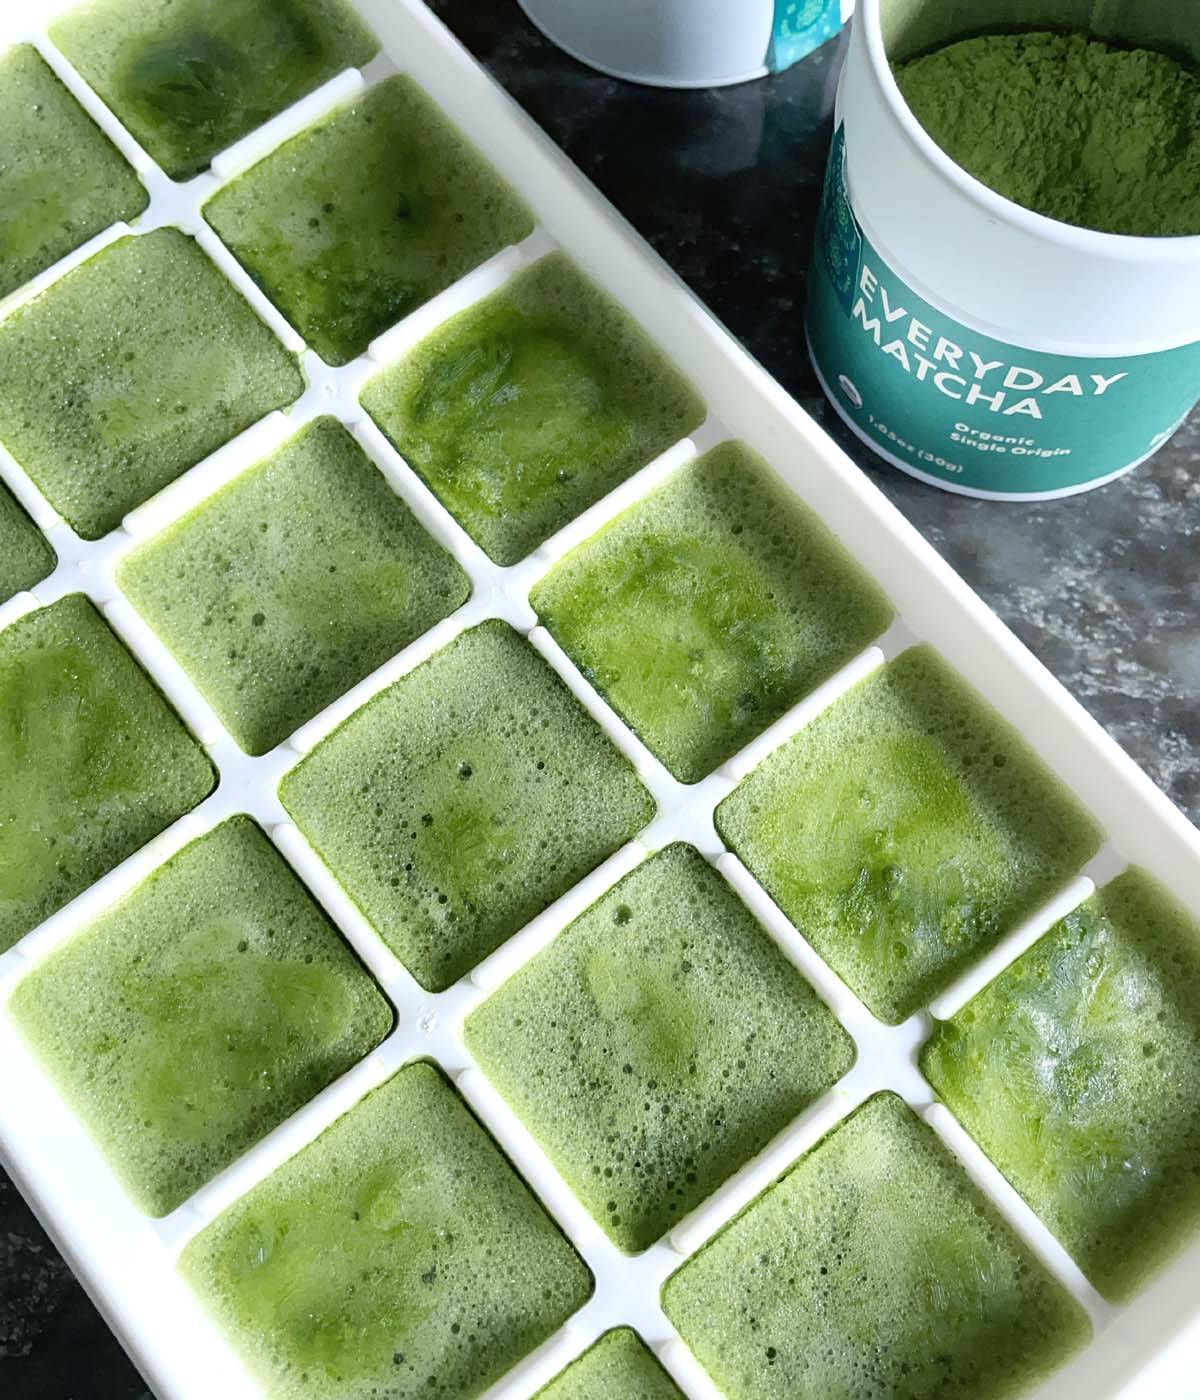 A white ice cube tray with green square ice cubes.